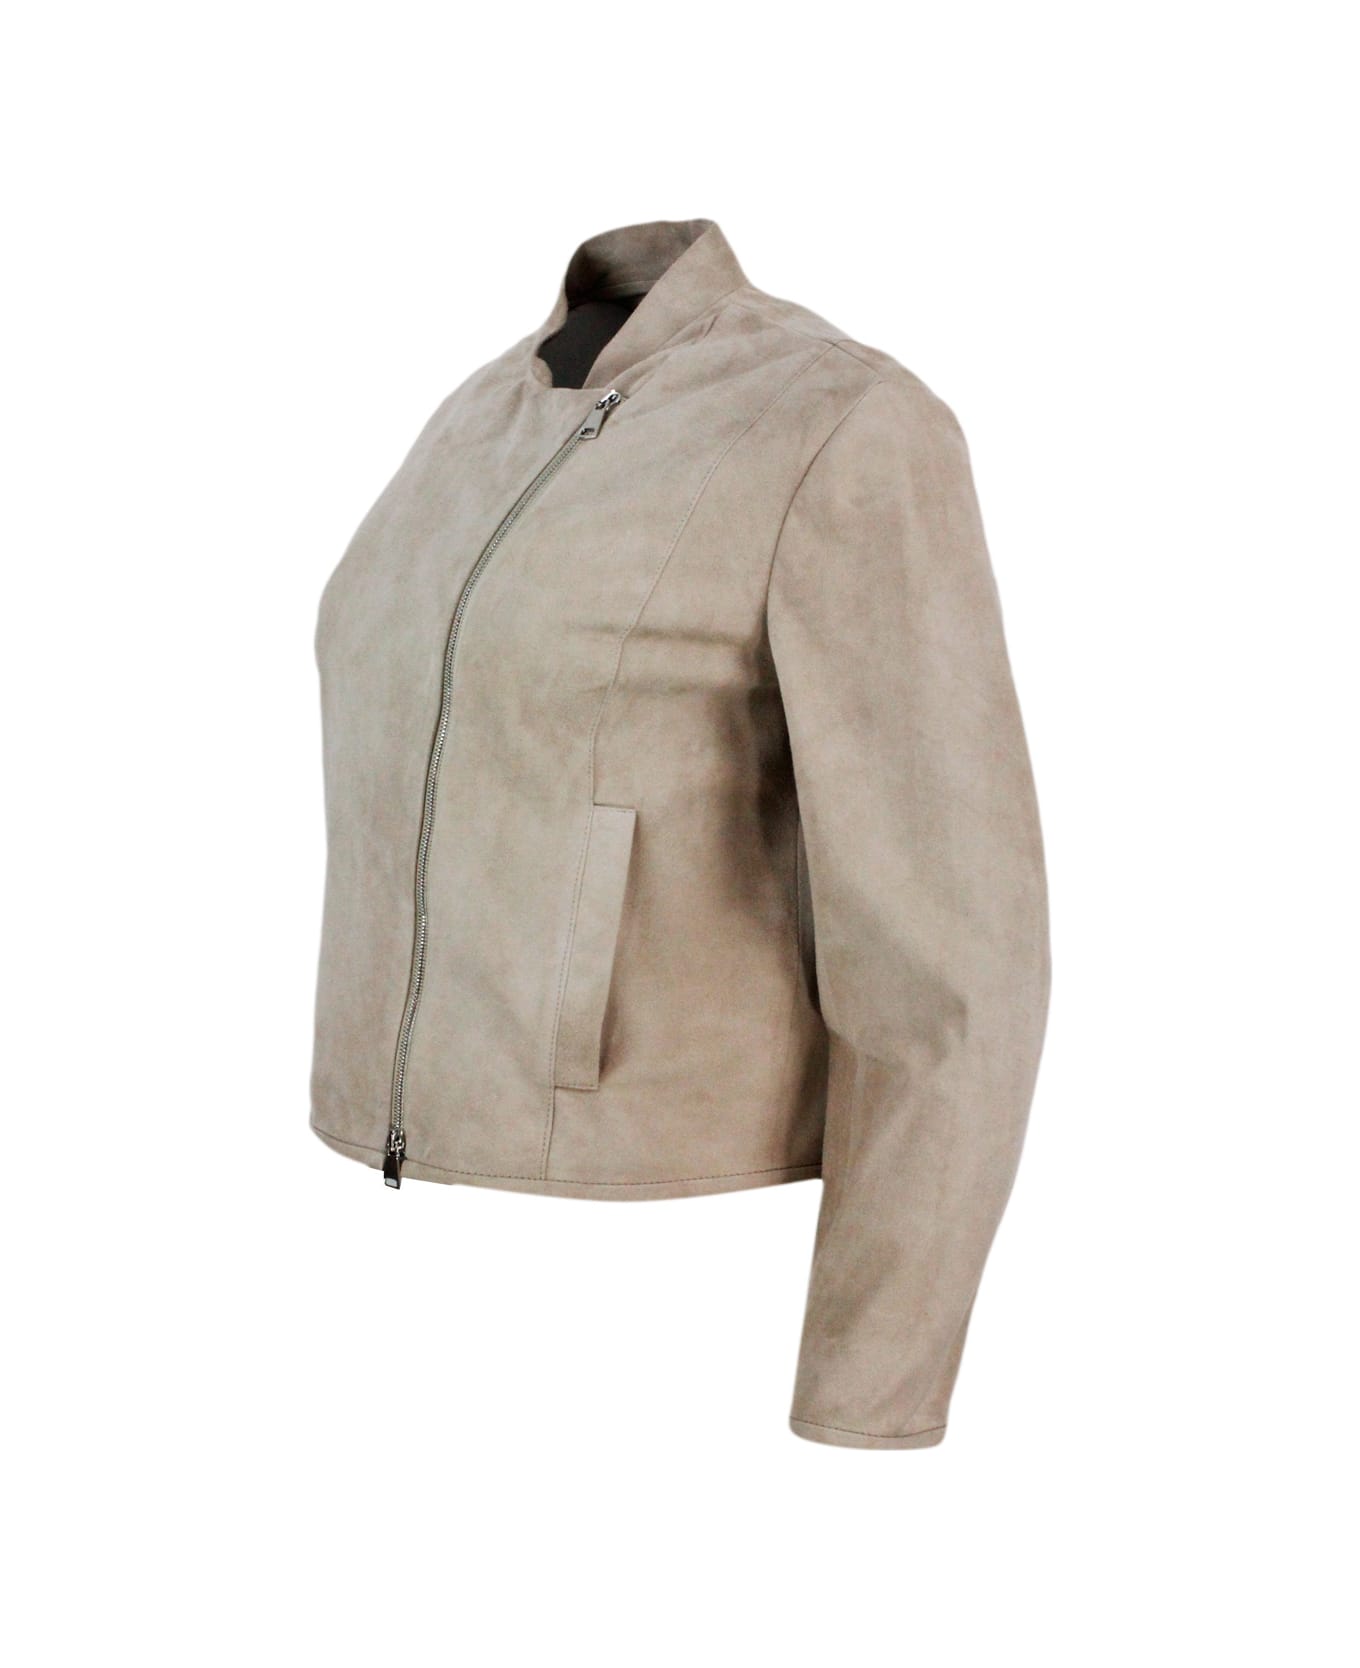 Antonelli Biker Jacket Made Of Soft Suede. Side Zip Closure And Pockets On The Front - Beige